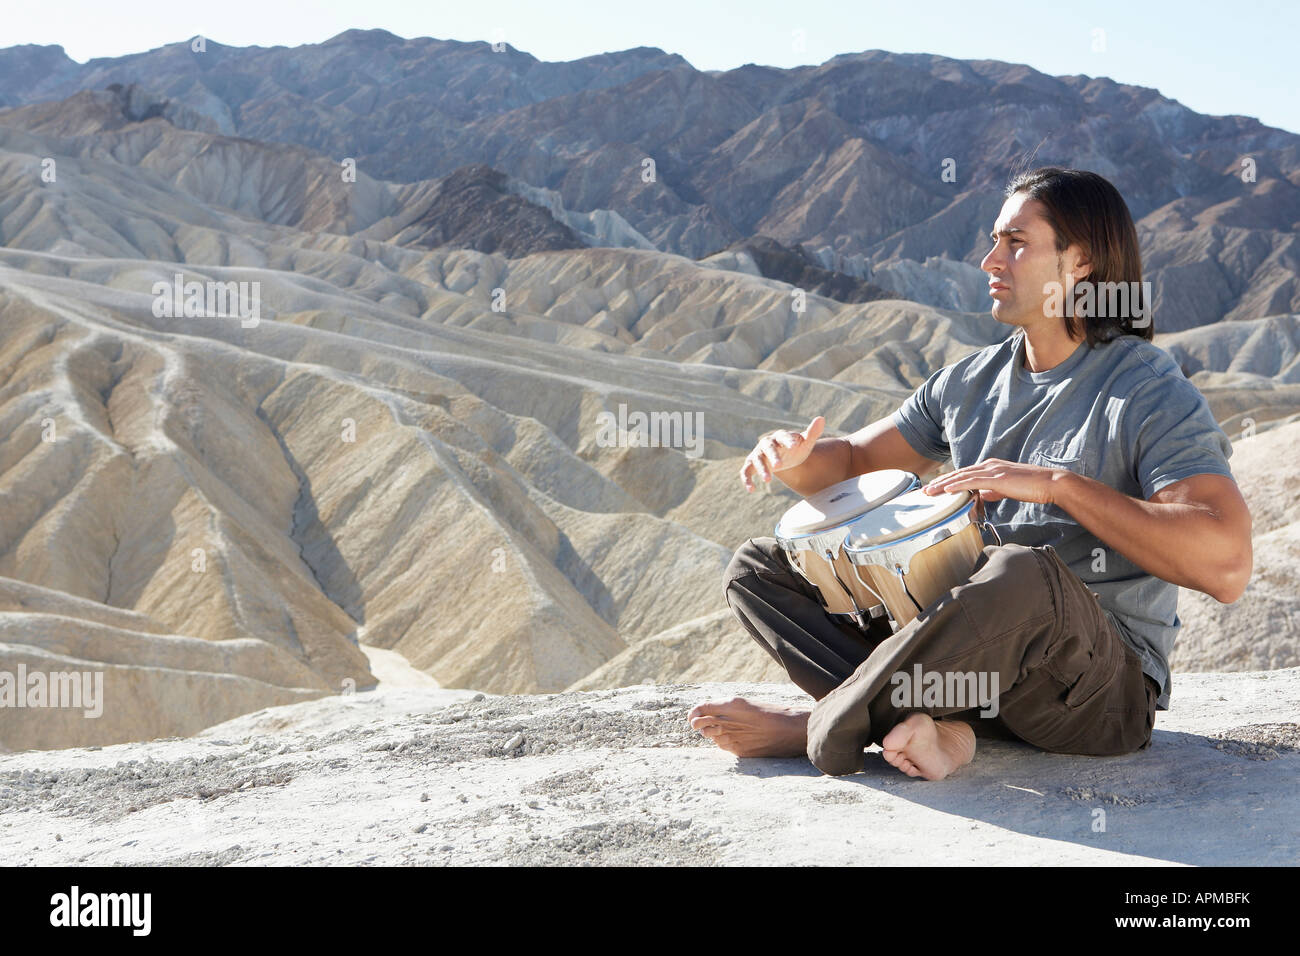 Man playing drums in desert, Death Valley, California, USA Stock Photo